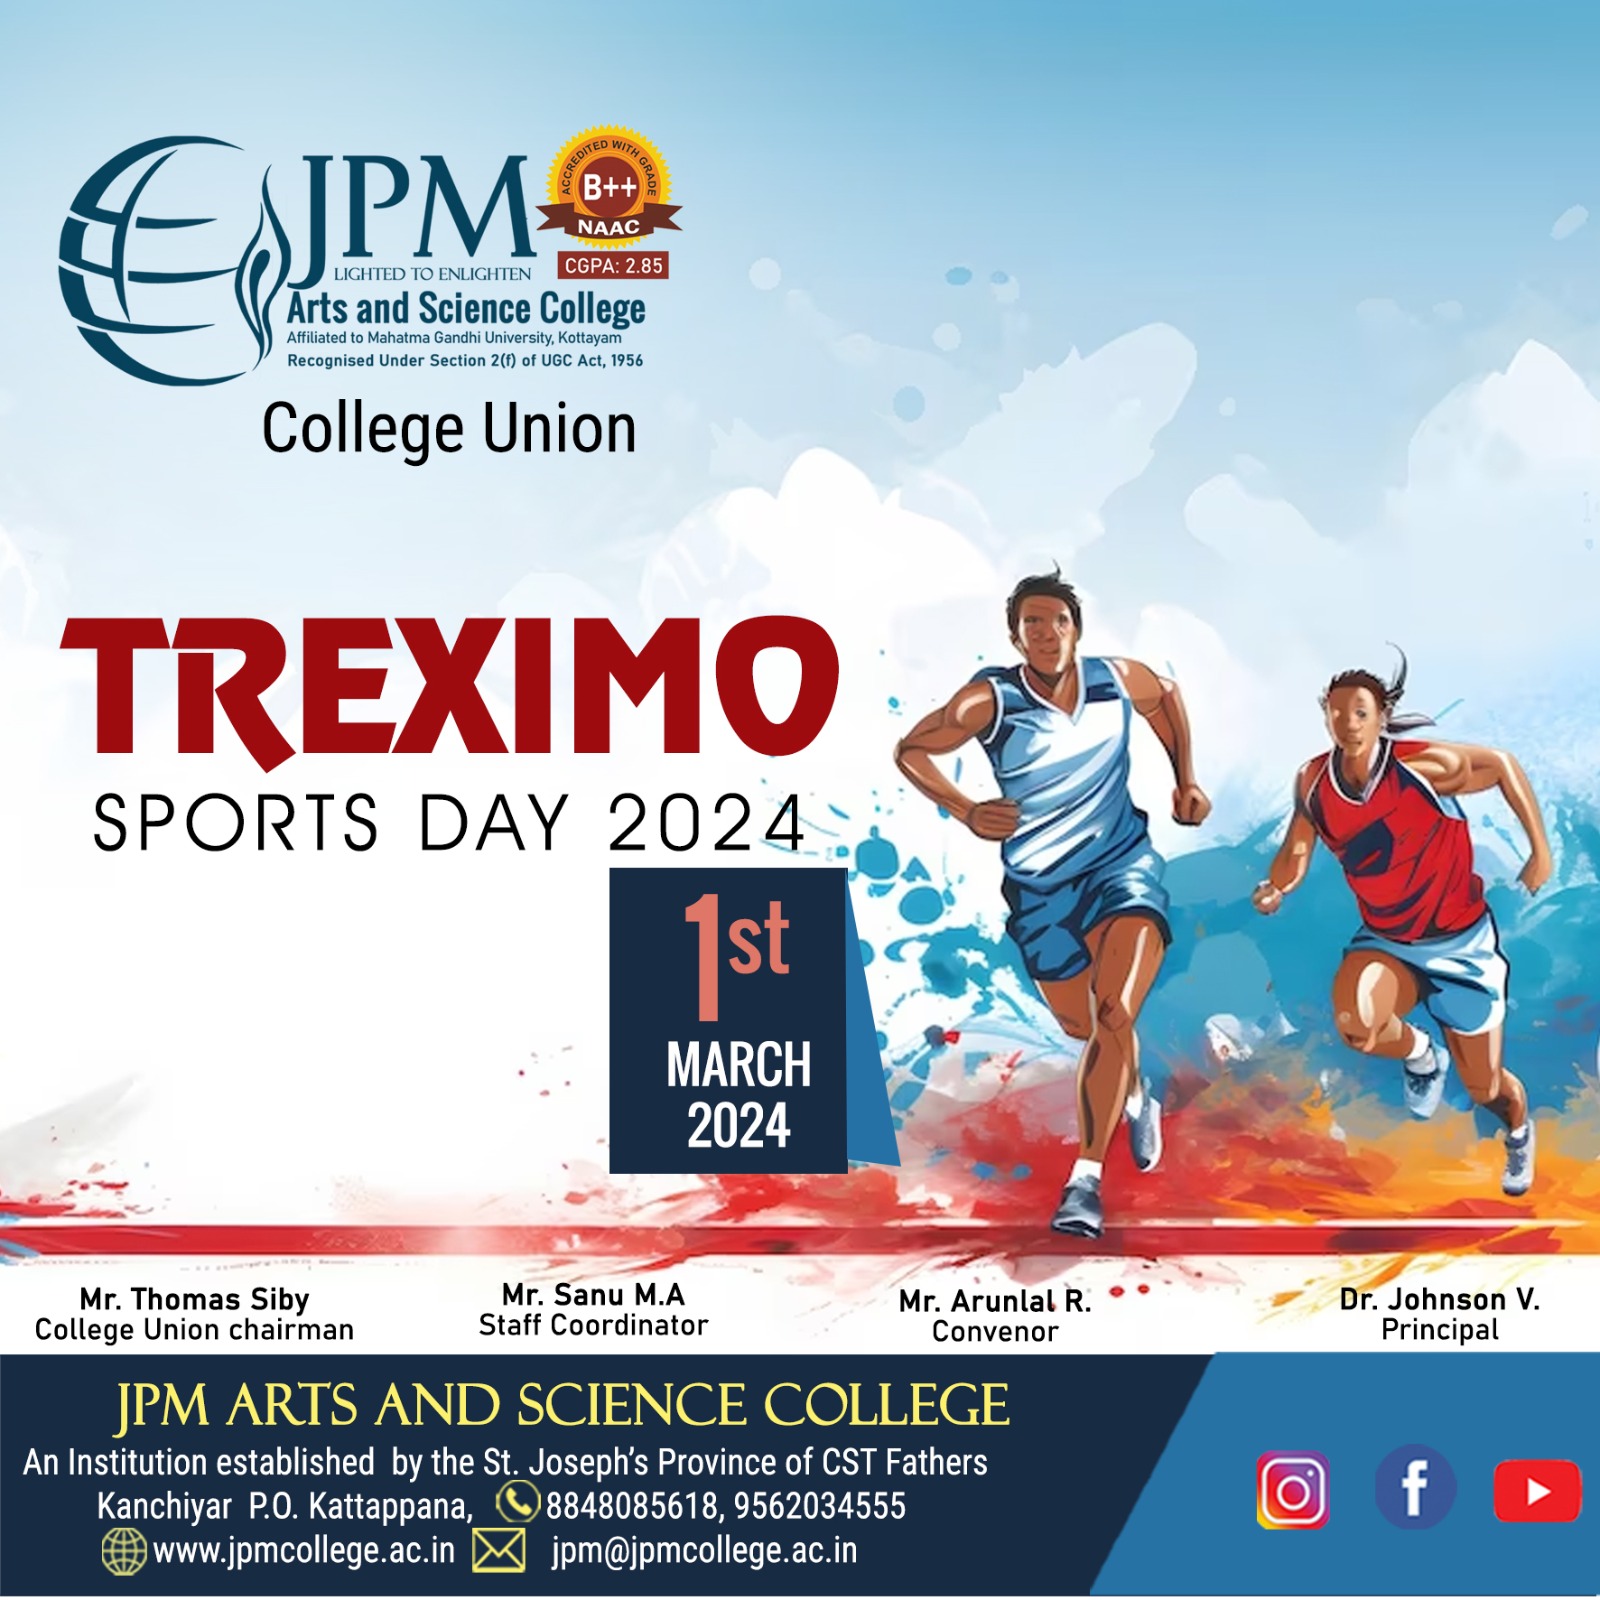 TREXIMO SPORTS DAY 2024